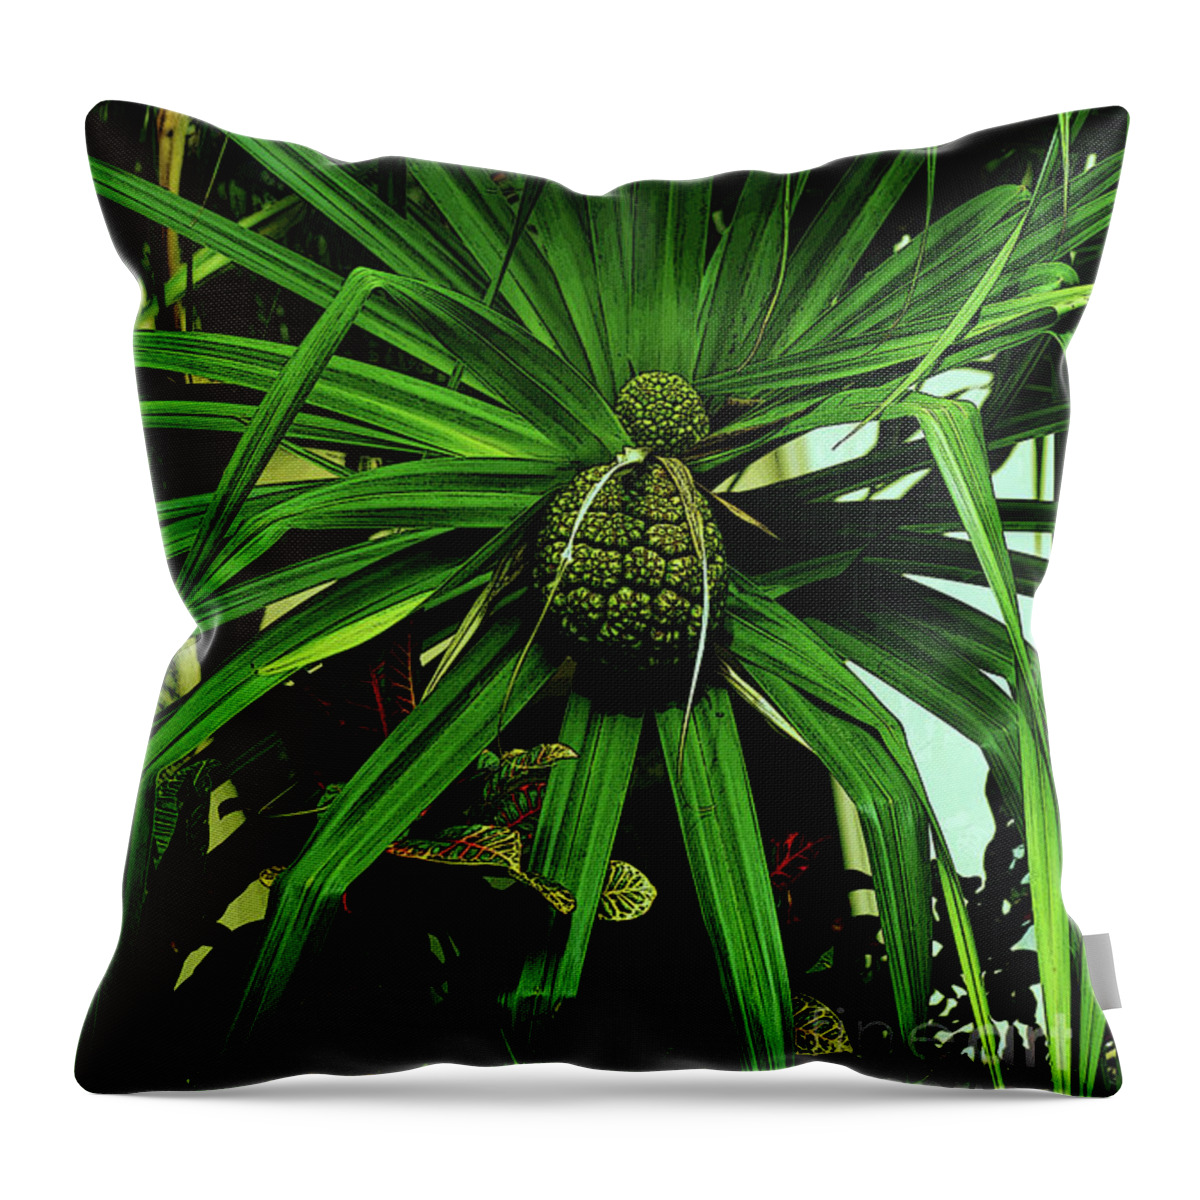 Hala Throw Pillow featuring the photograph Lauhala Plant by Craig Wood